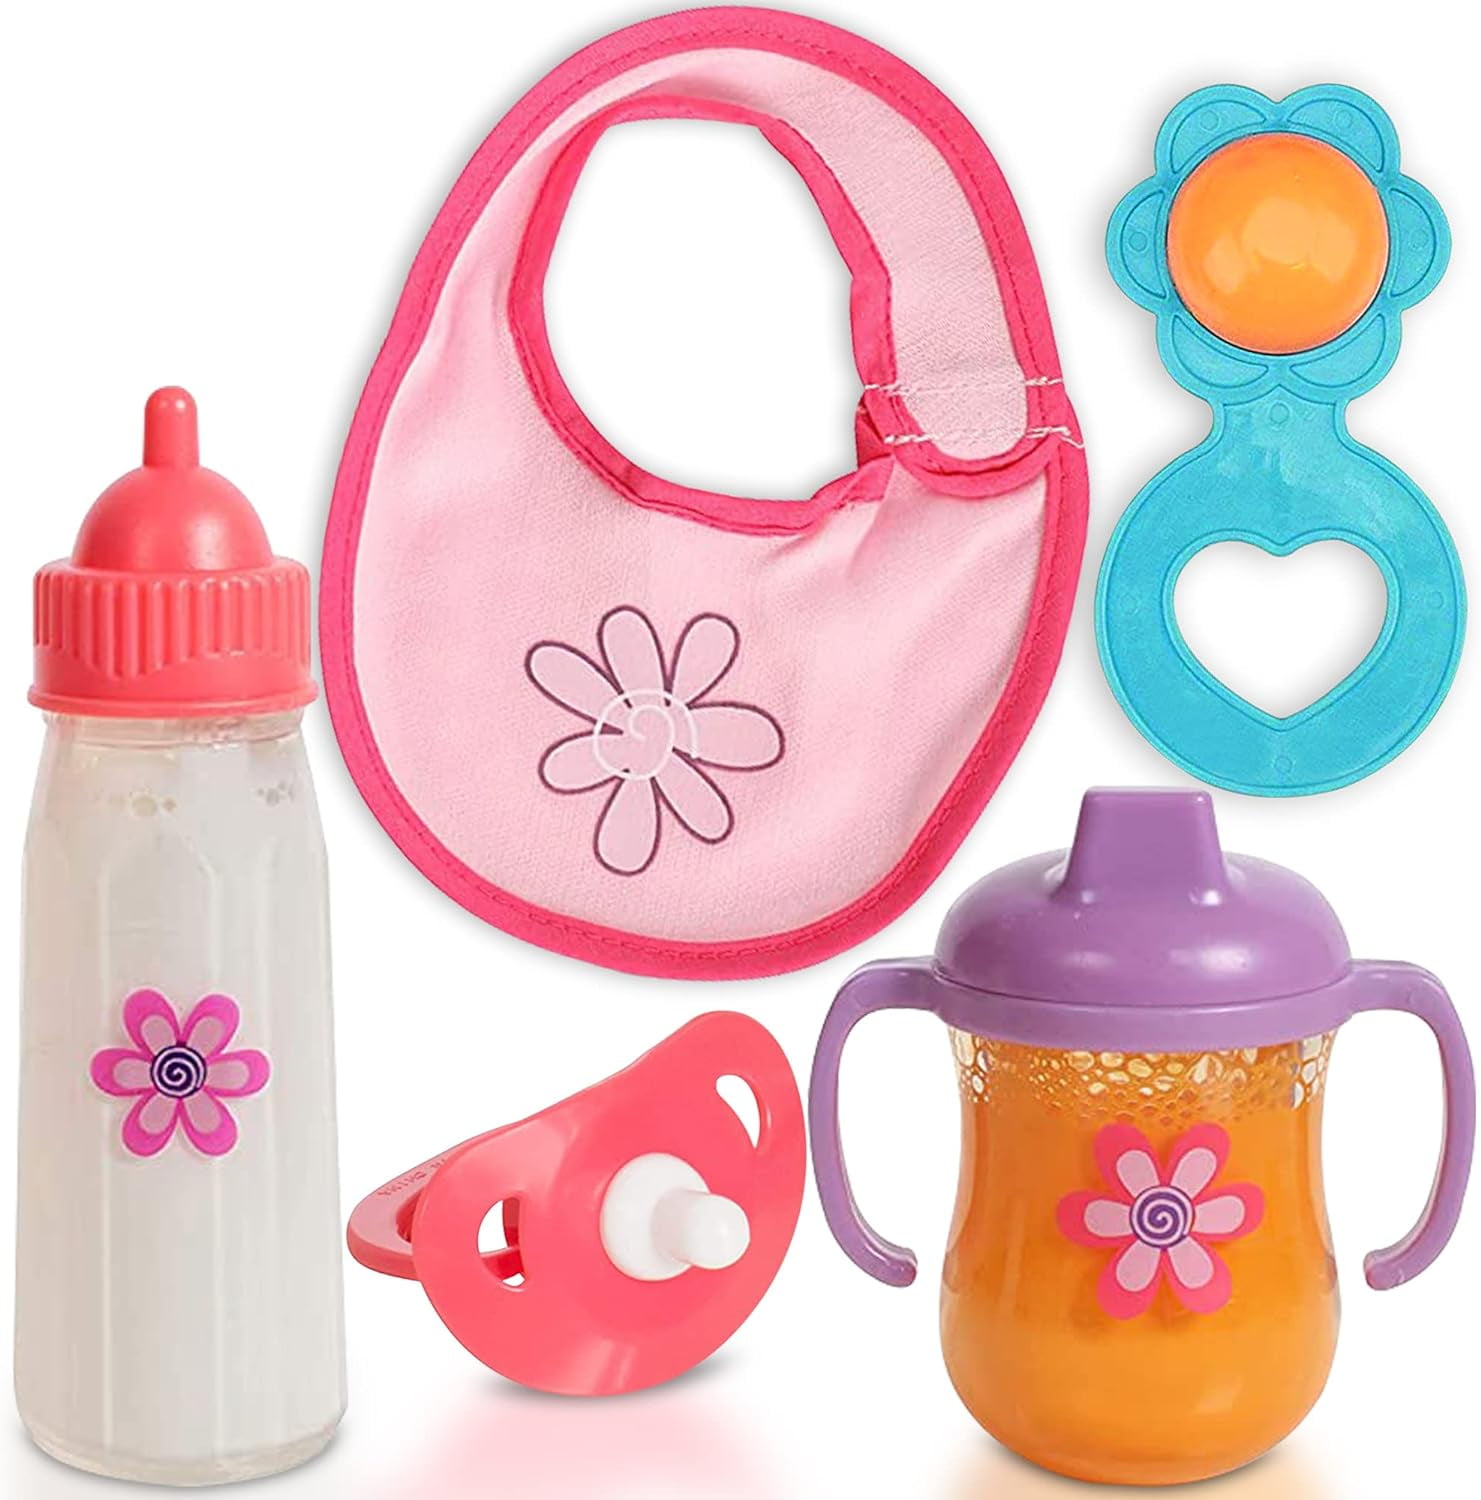 MAM Baby: pacifiers, baby bottles, sippy cups & more